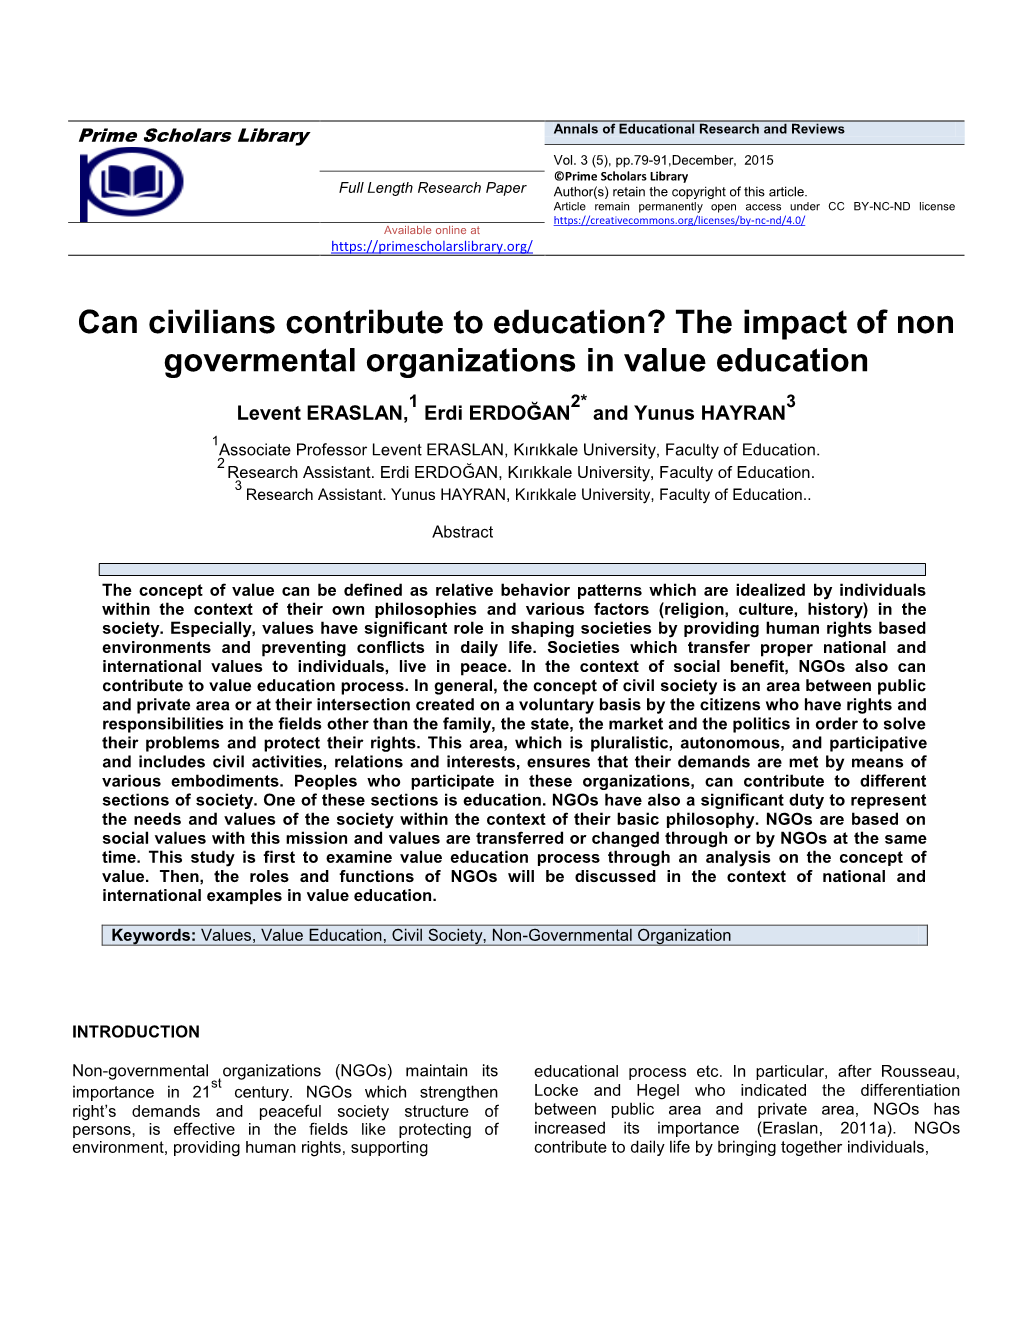 The Impact of Non Govermental Organizations in Value Education